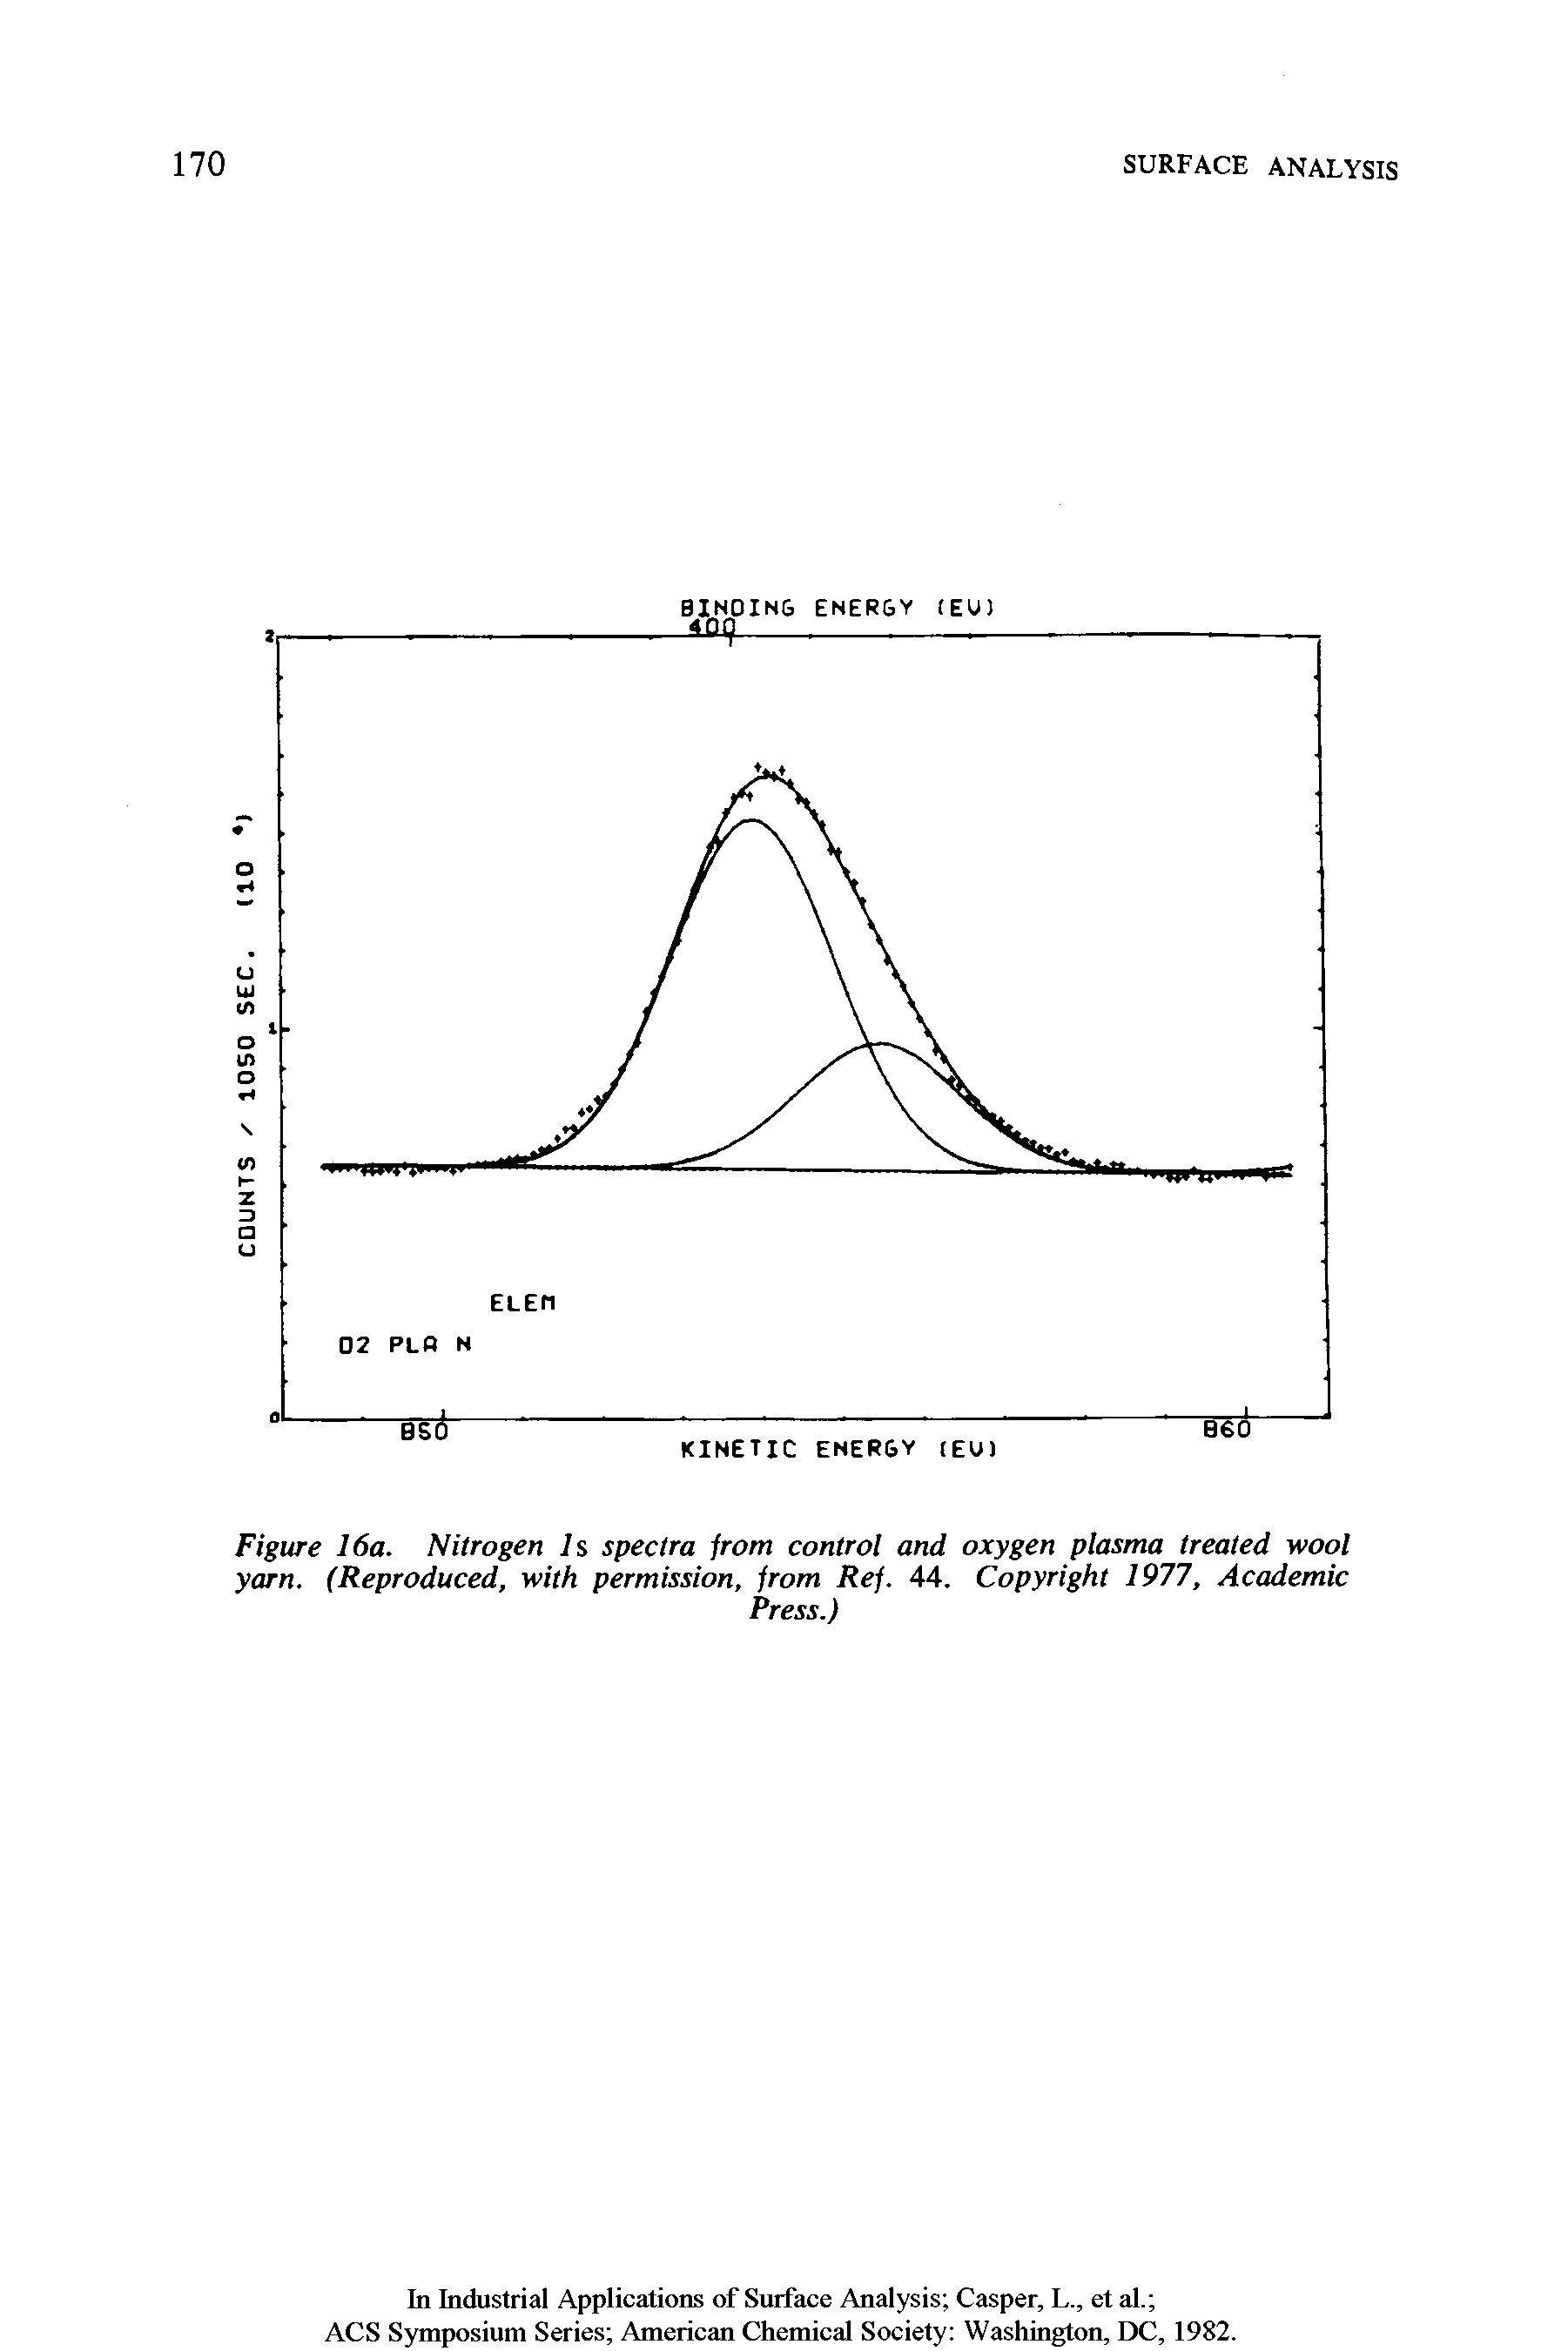 Figure 16a. Nitrogen Is spectra from control and oxygen plasma treated wool yarn. (Reproduced, with permission, from Ref. 44. Copyright 1977, Academic...